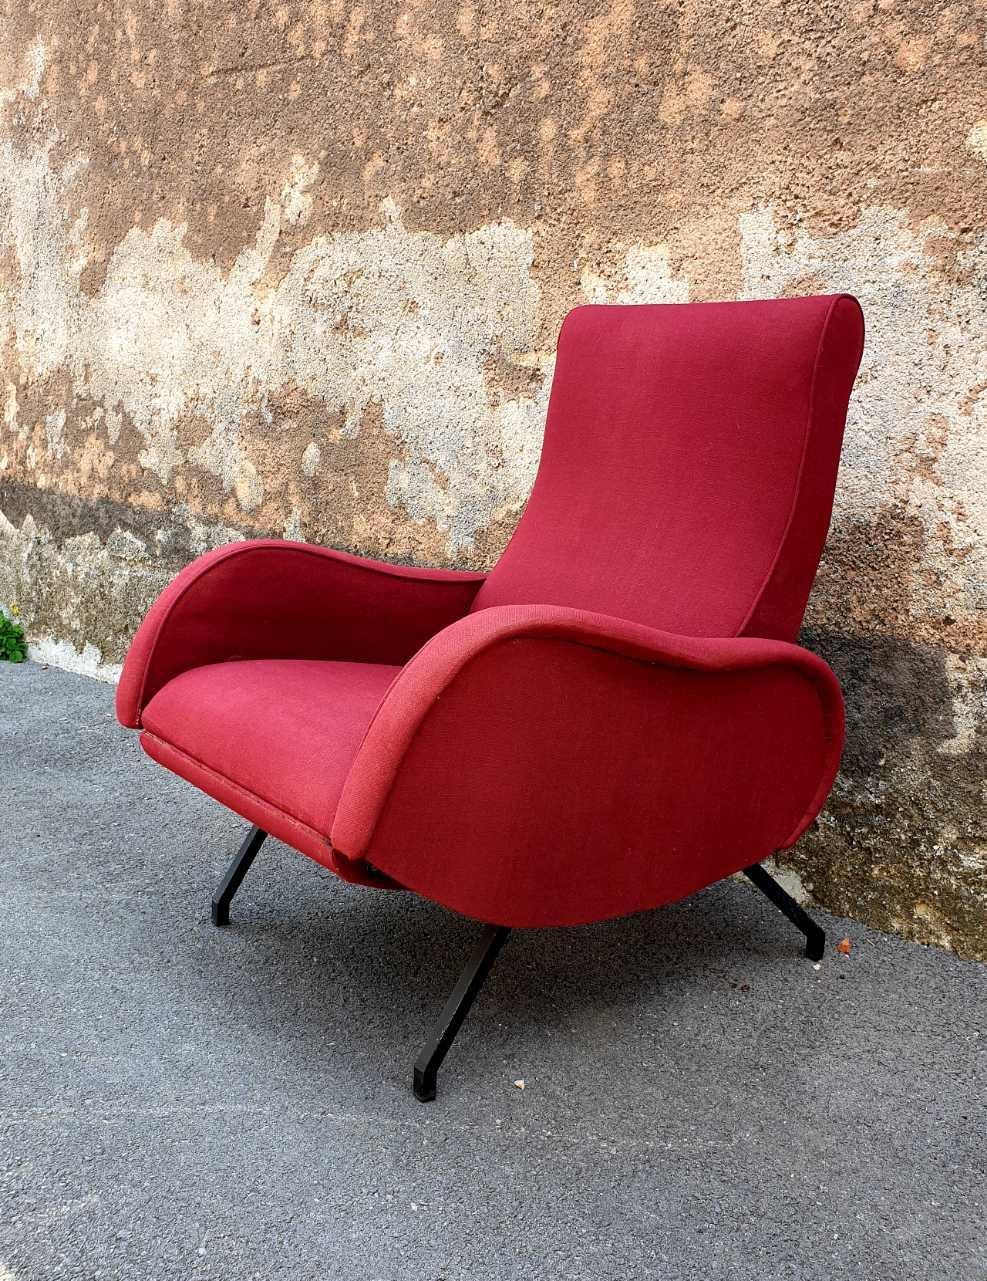 Metal Midcentury Red Reclining Armchair, Marco Zanuso Style, Studio Pizzoli Italy 60s For Sale